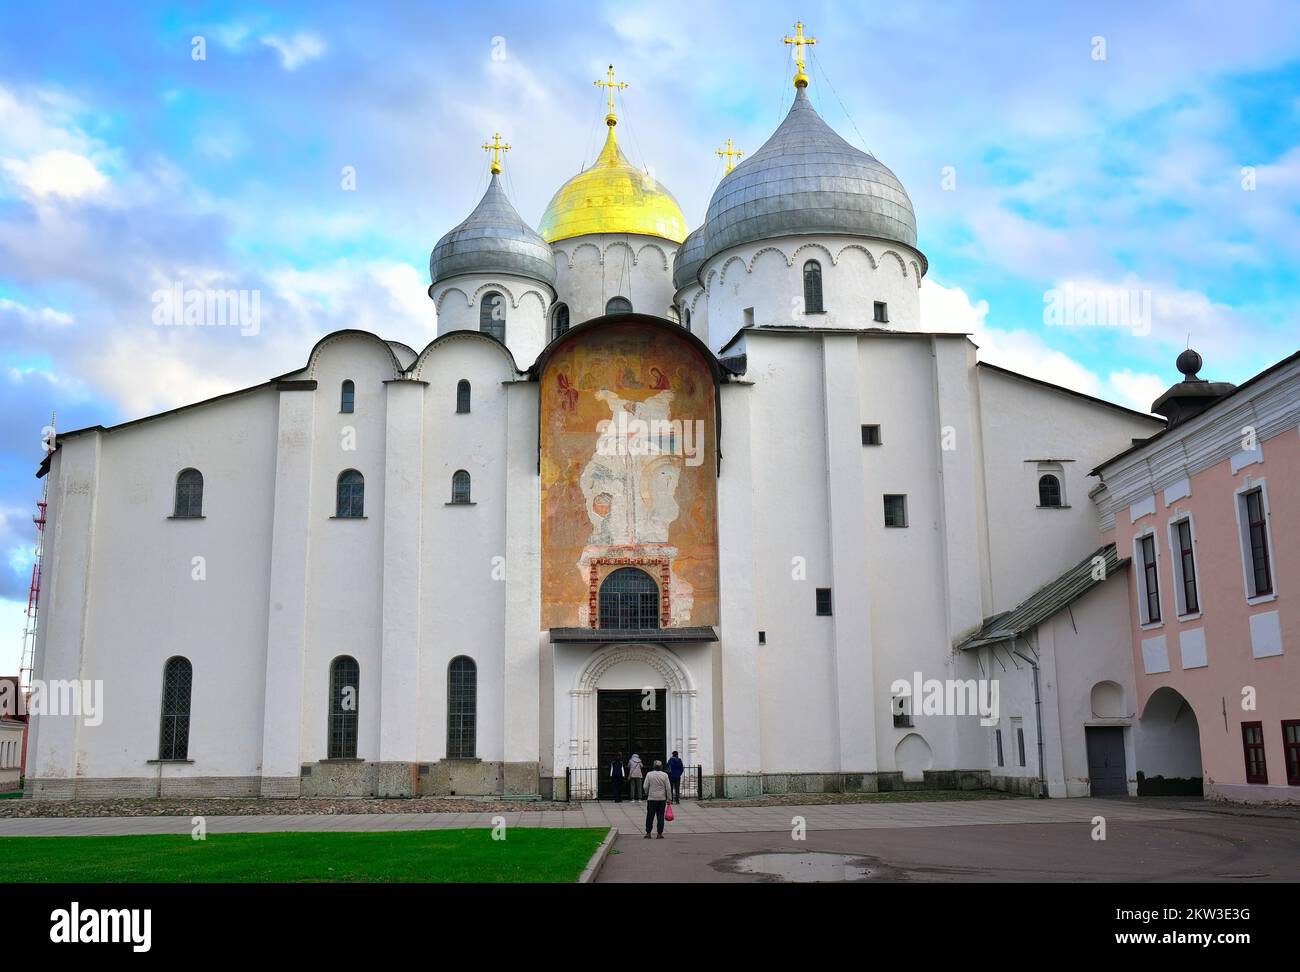 Veliky Novgorod, Russia, 09.26.2022. Monuments of the old Kremlin. The facade of St. Sophia Cathedral, a monument of ancient Russian architecture of t Stock Photo